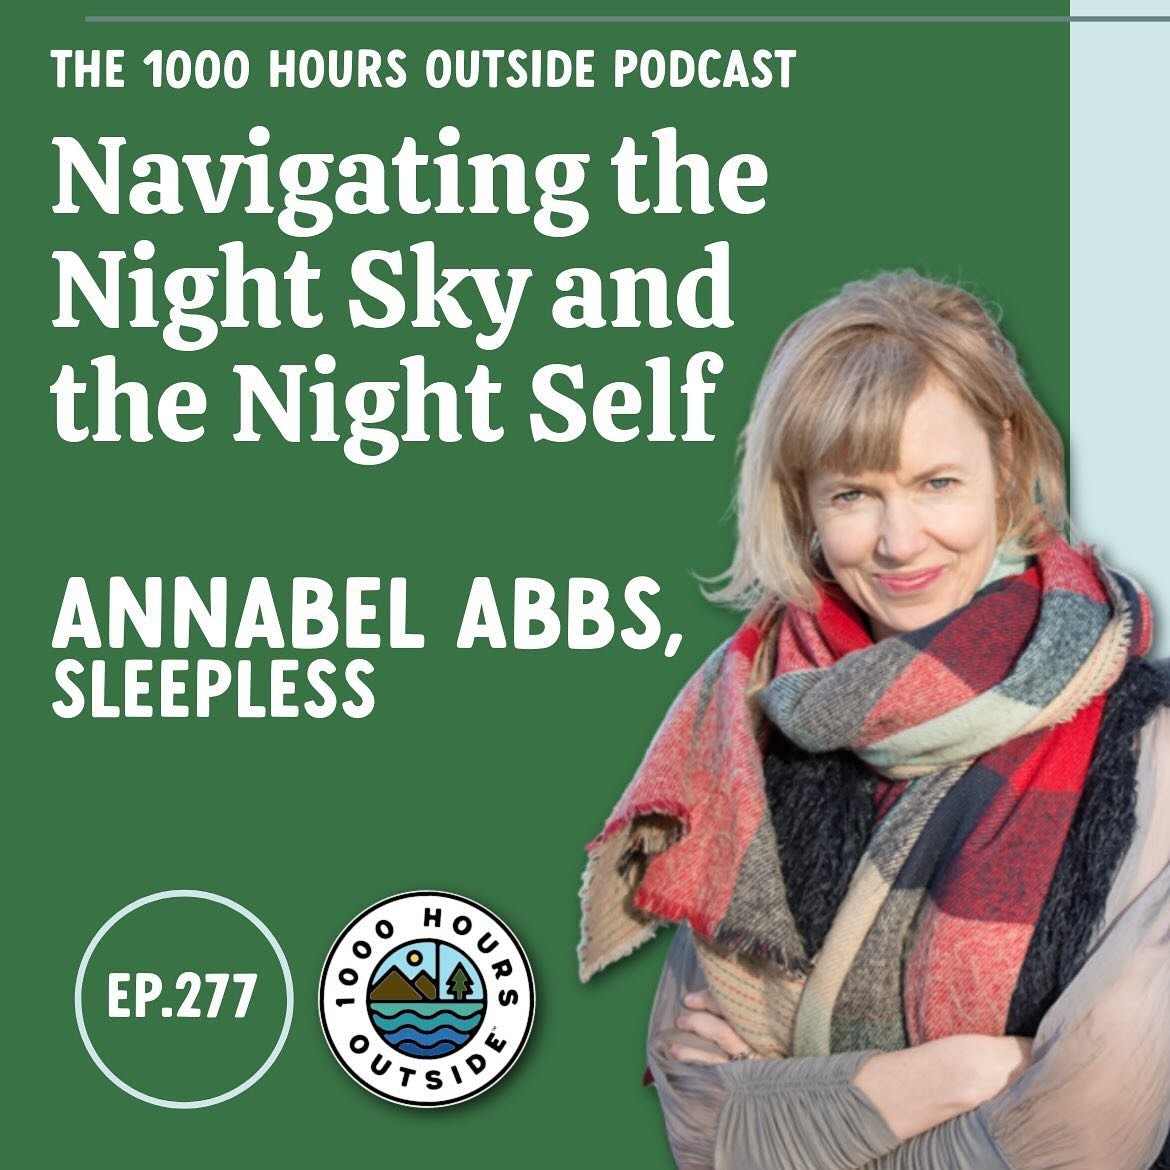 I looooove the pledge in the very last slide ➡️

@annabelabbs fascinates me!!!! She is an all-time favorite guest on our podcast! This new episode is filled with all sorts of topics you may have never heard about.

Give it a listen and share around!
